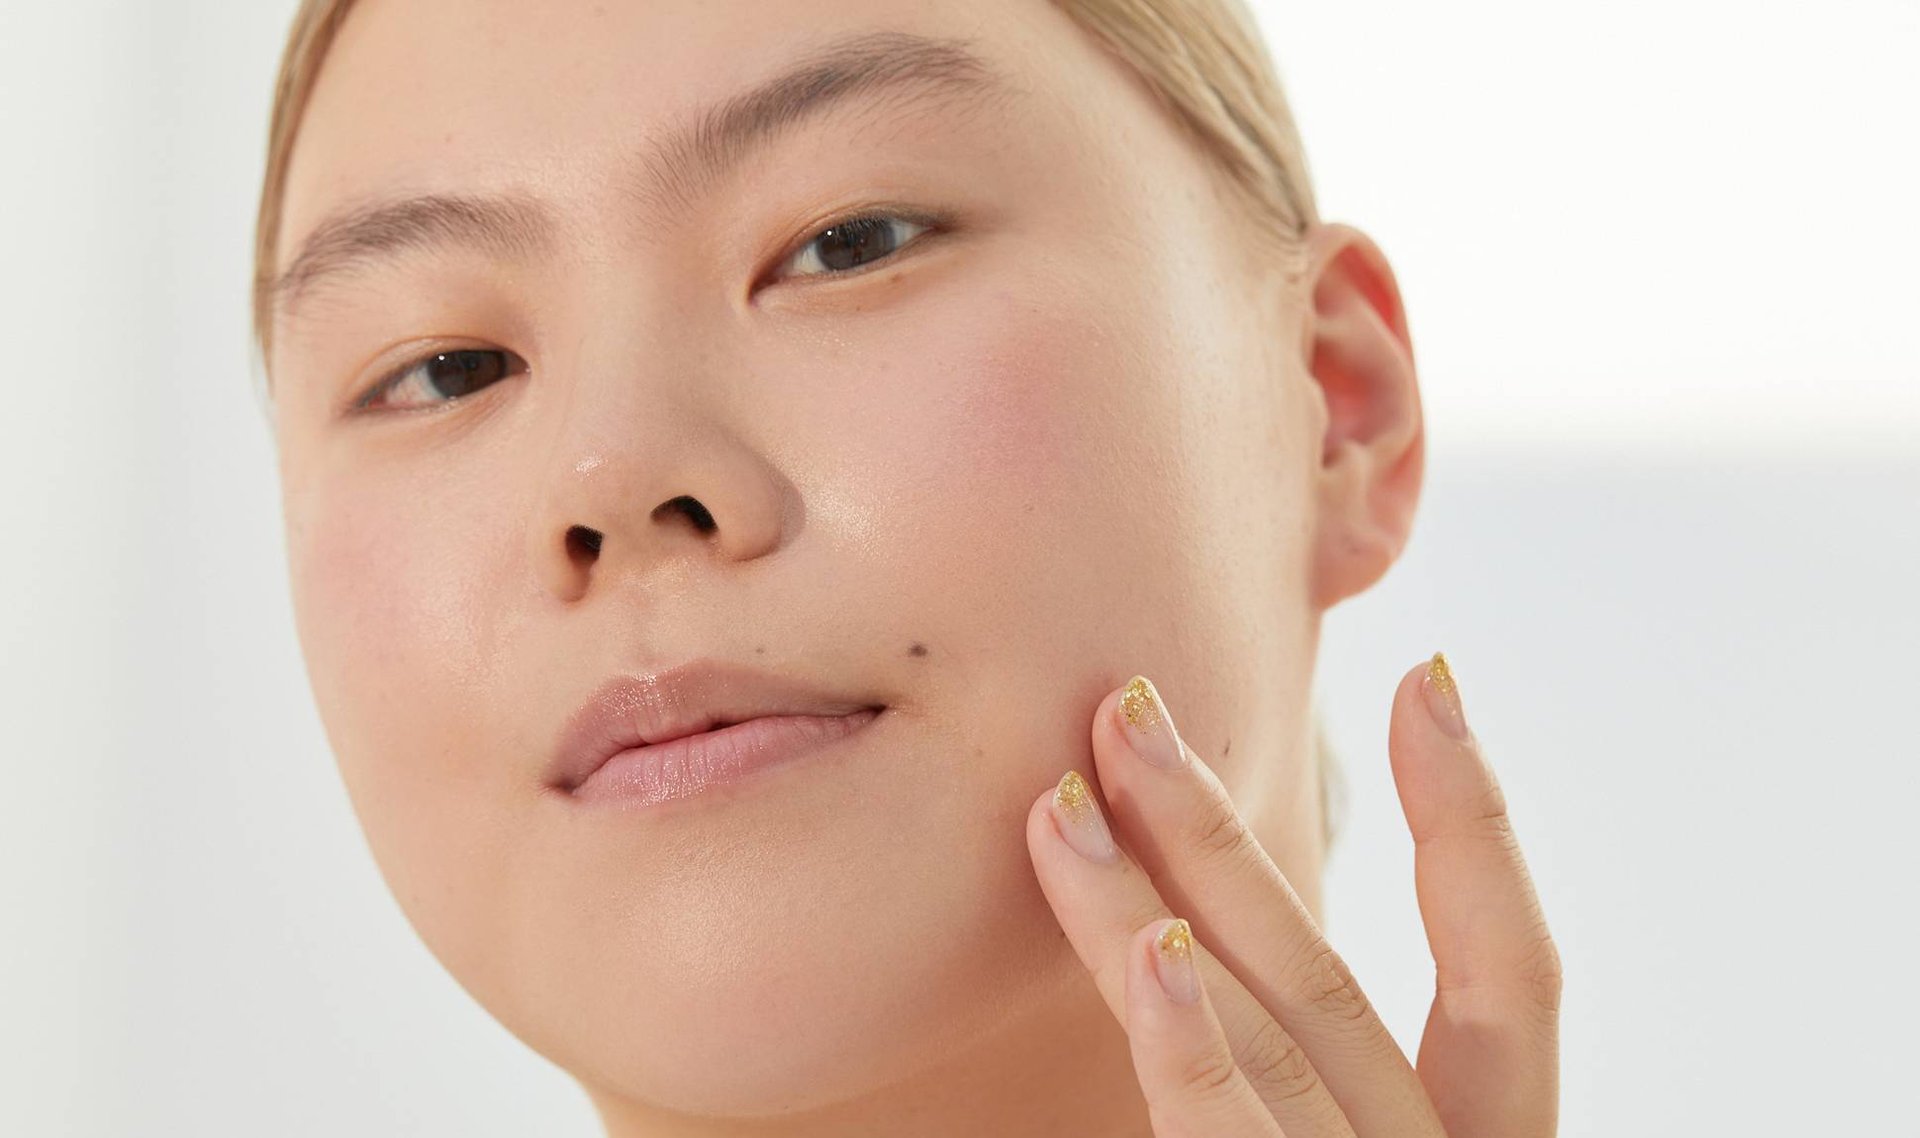 What Type of Acne Do You Have? Take This Quiz to Find Out